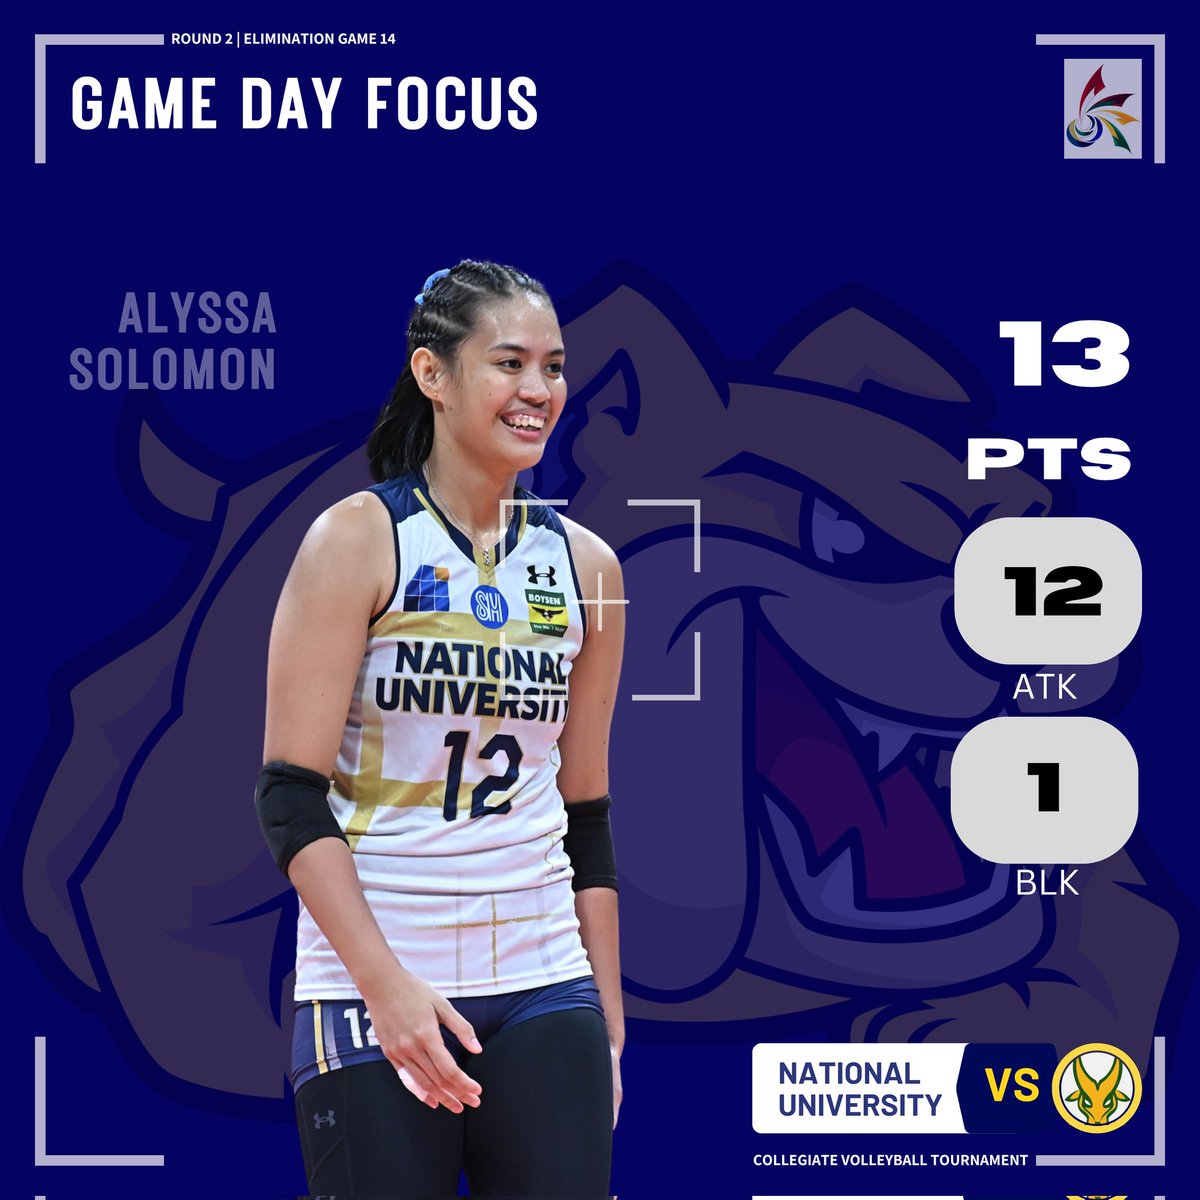 The NU Lady Bulldogs secured a twice-to-beat advantage in the semis after winning their FEU match, 25-21, 25-19, 25-22, today at the SMART Araneta Coliseum.

Player of the game: Aly Solomon 
13 points - 12 attacks, 1 block

📷: UAAP Media Bureau 
#GoBulldogs #UAAPSeason86